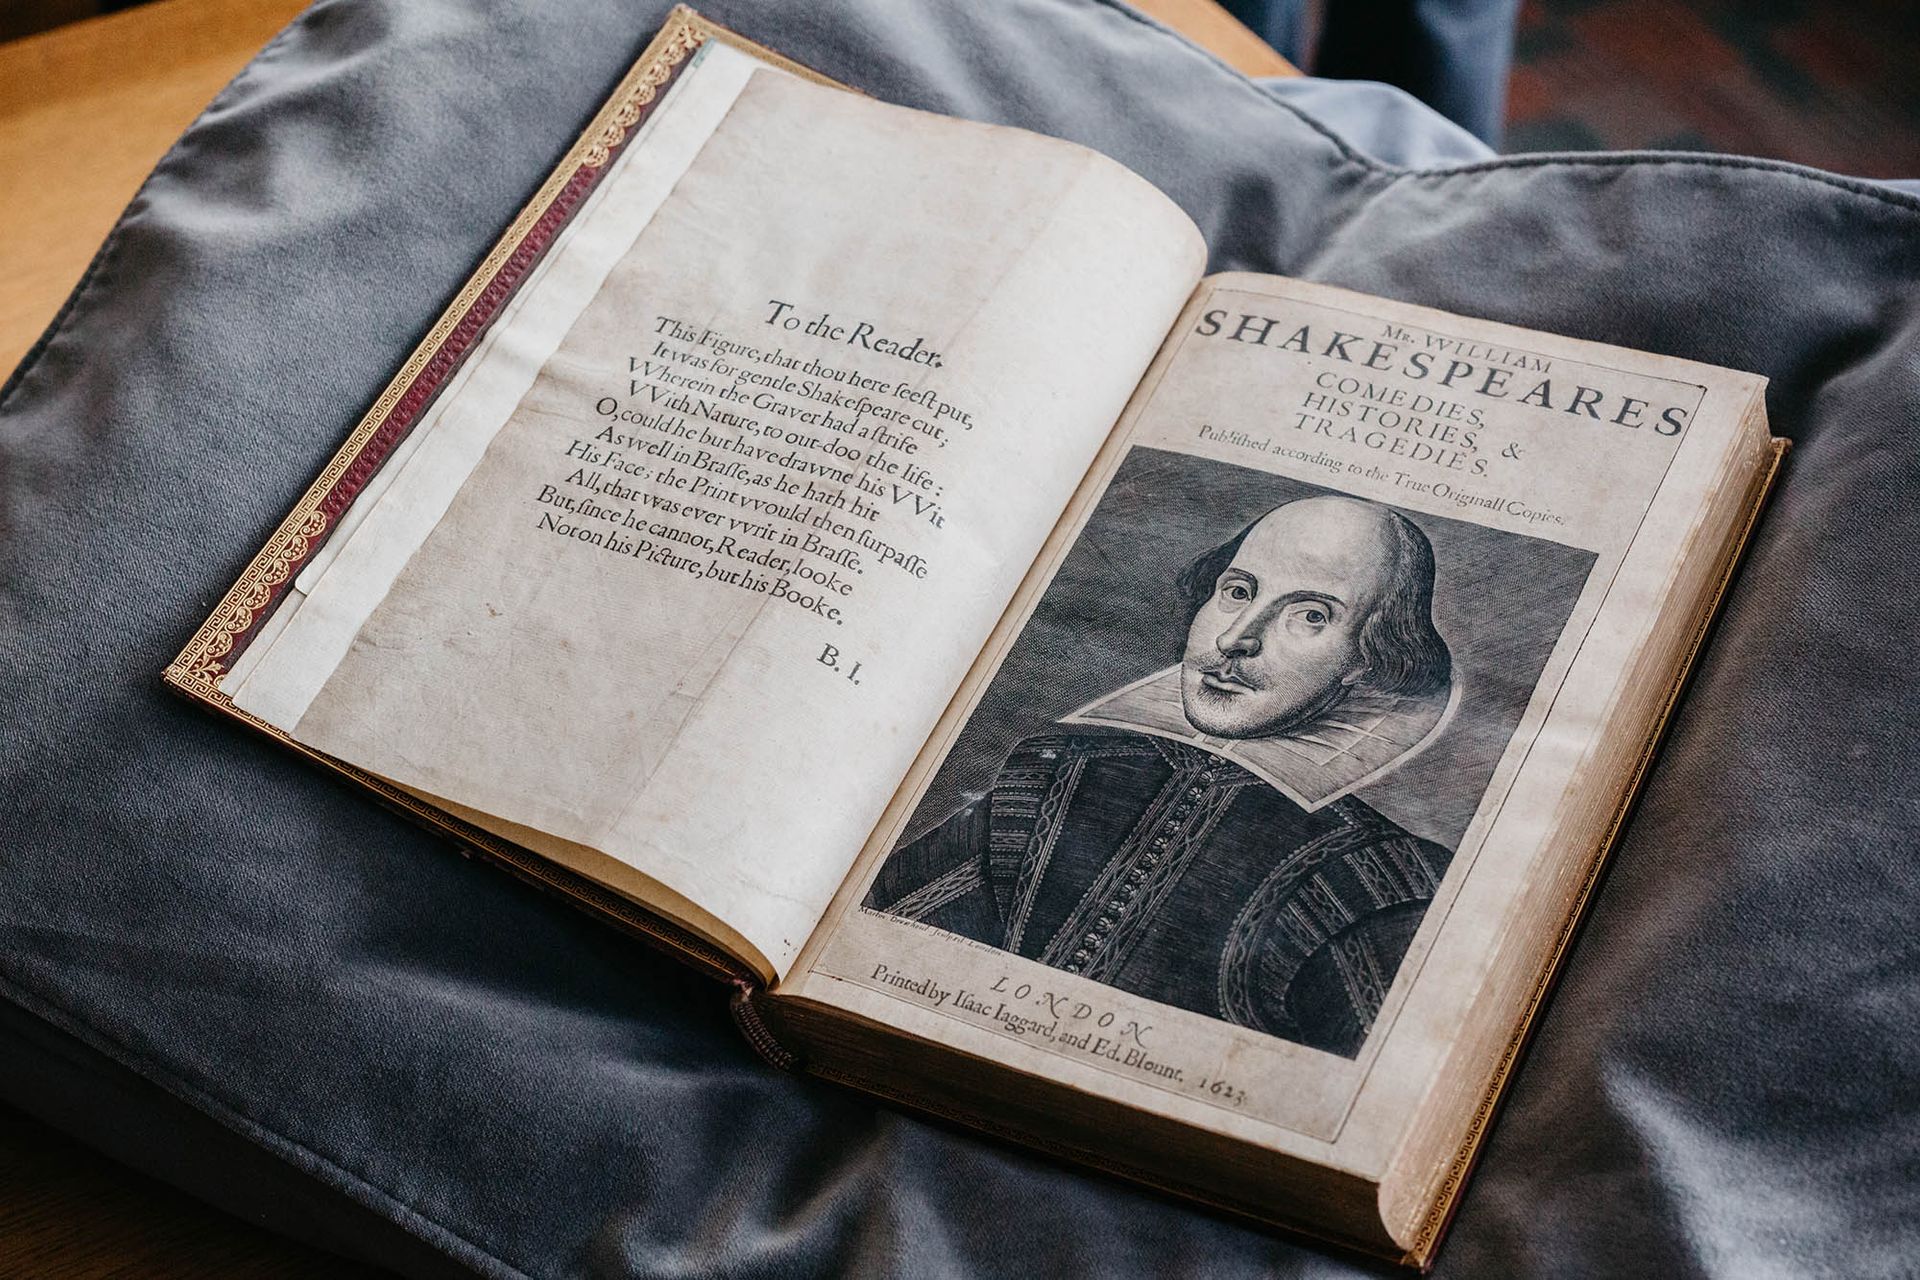 The newly acquired First Folio of William Shakespeare's Comedies Histories and Tragedies (1623) Courtesy the University of British Columbia Library, Vancouver